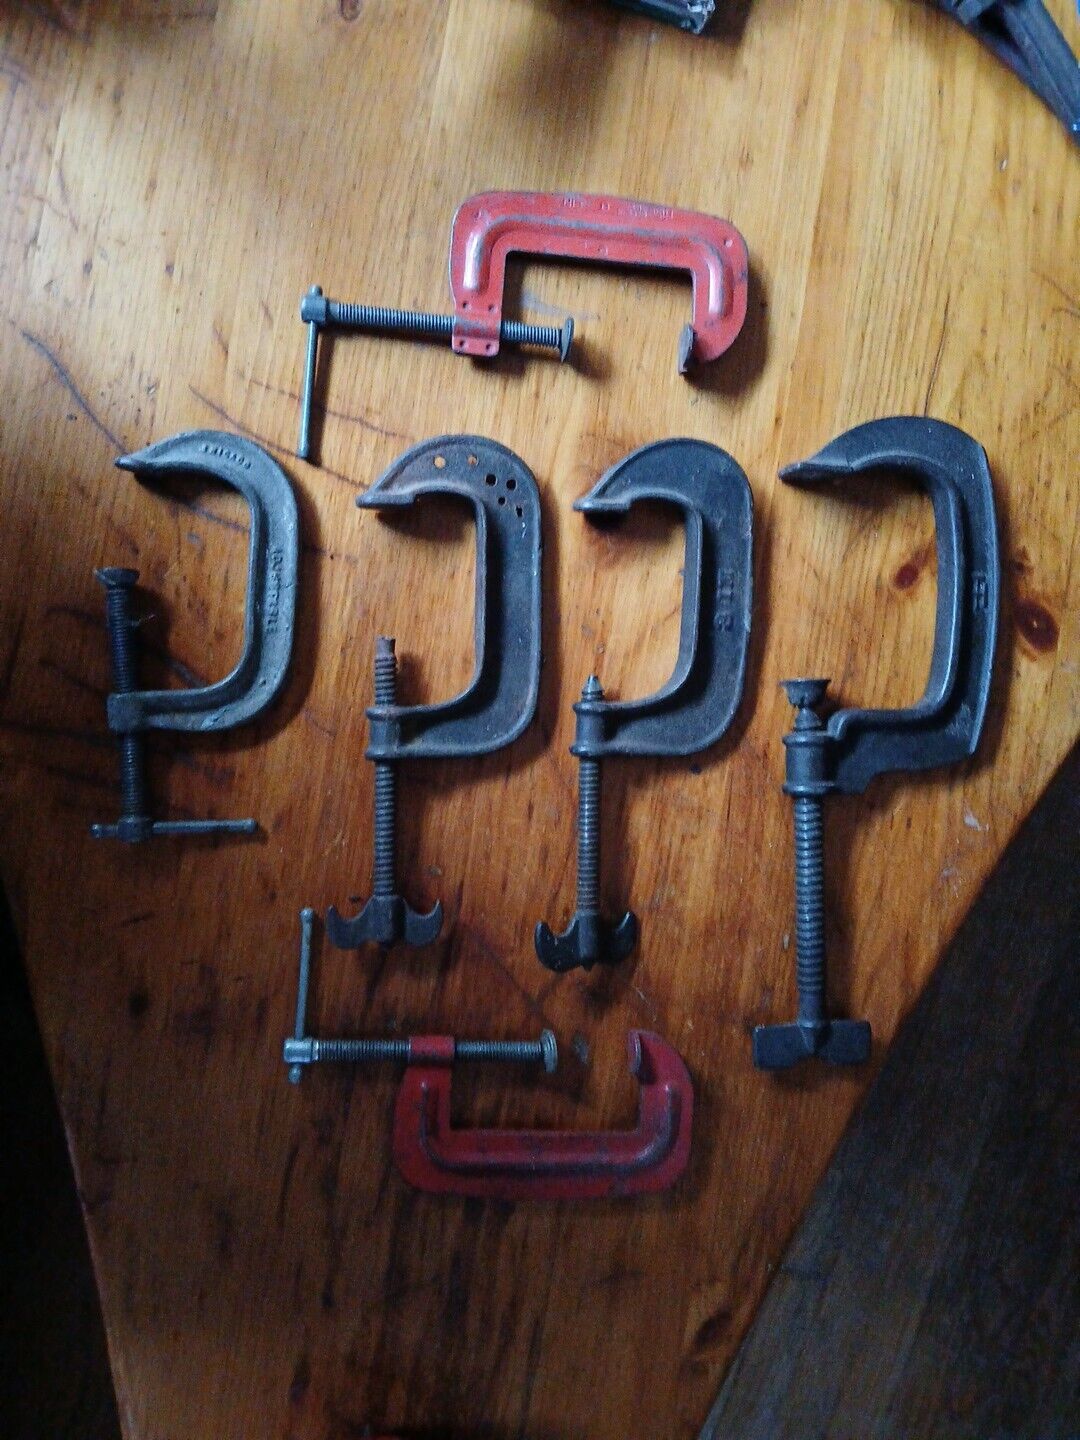 6 Vintage C Clamps Up To 4 Inch